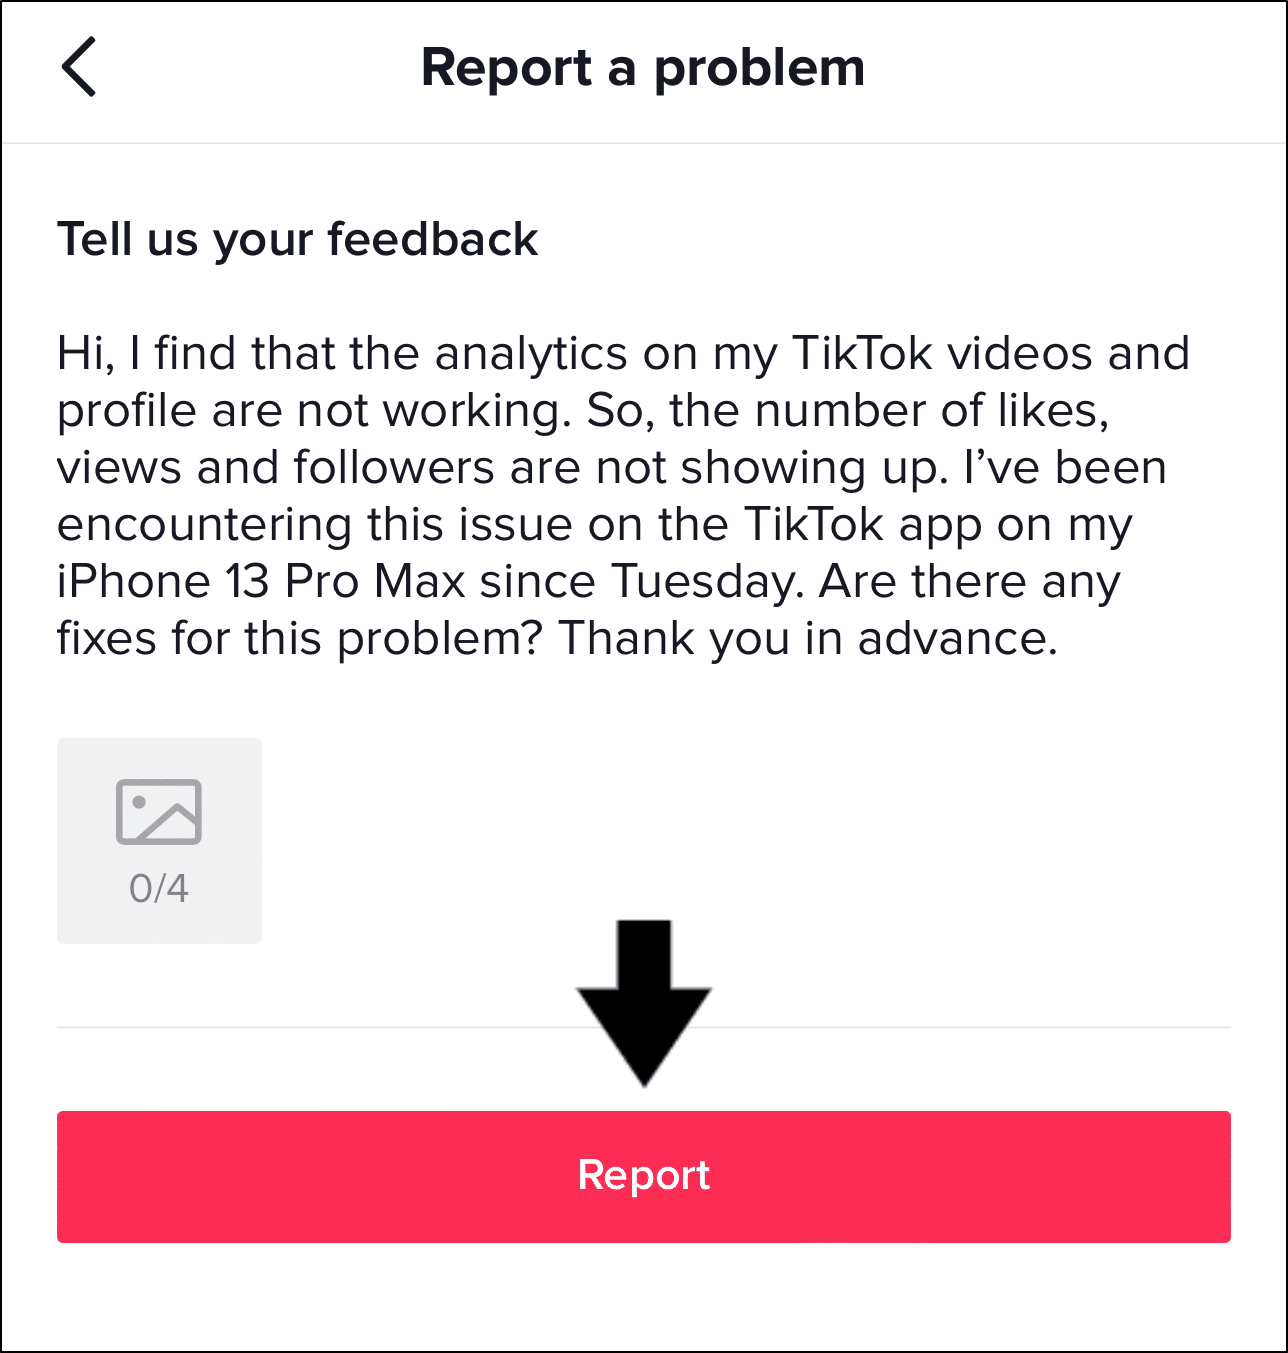 report the problem to TikTok Support to fix TikTok analytics, likes, views, or active followers not showing or working